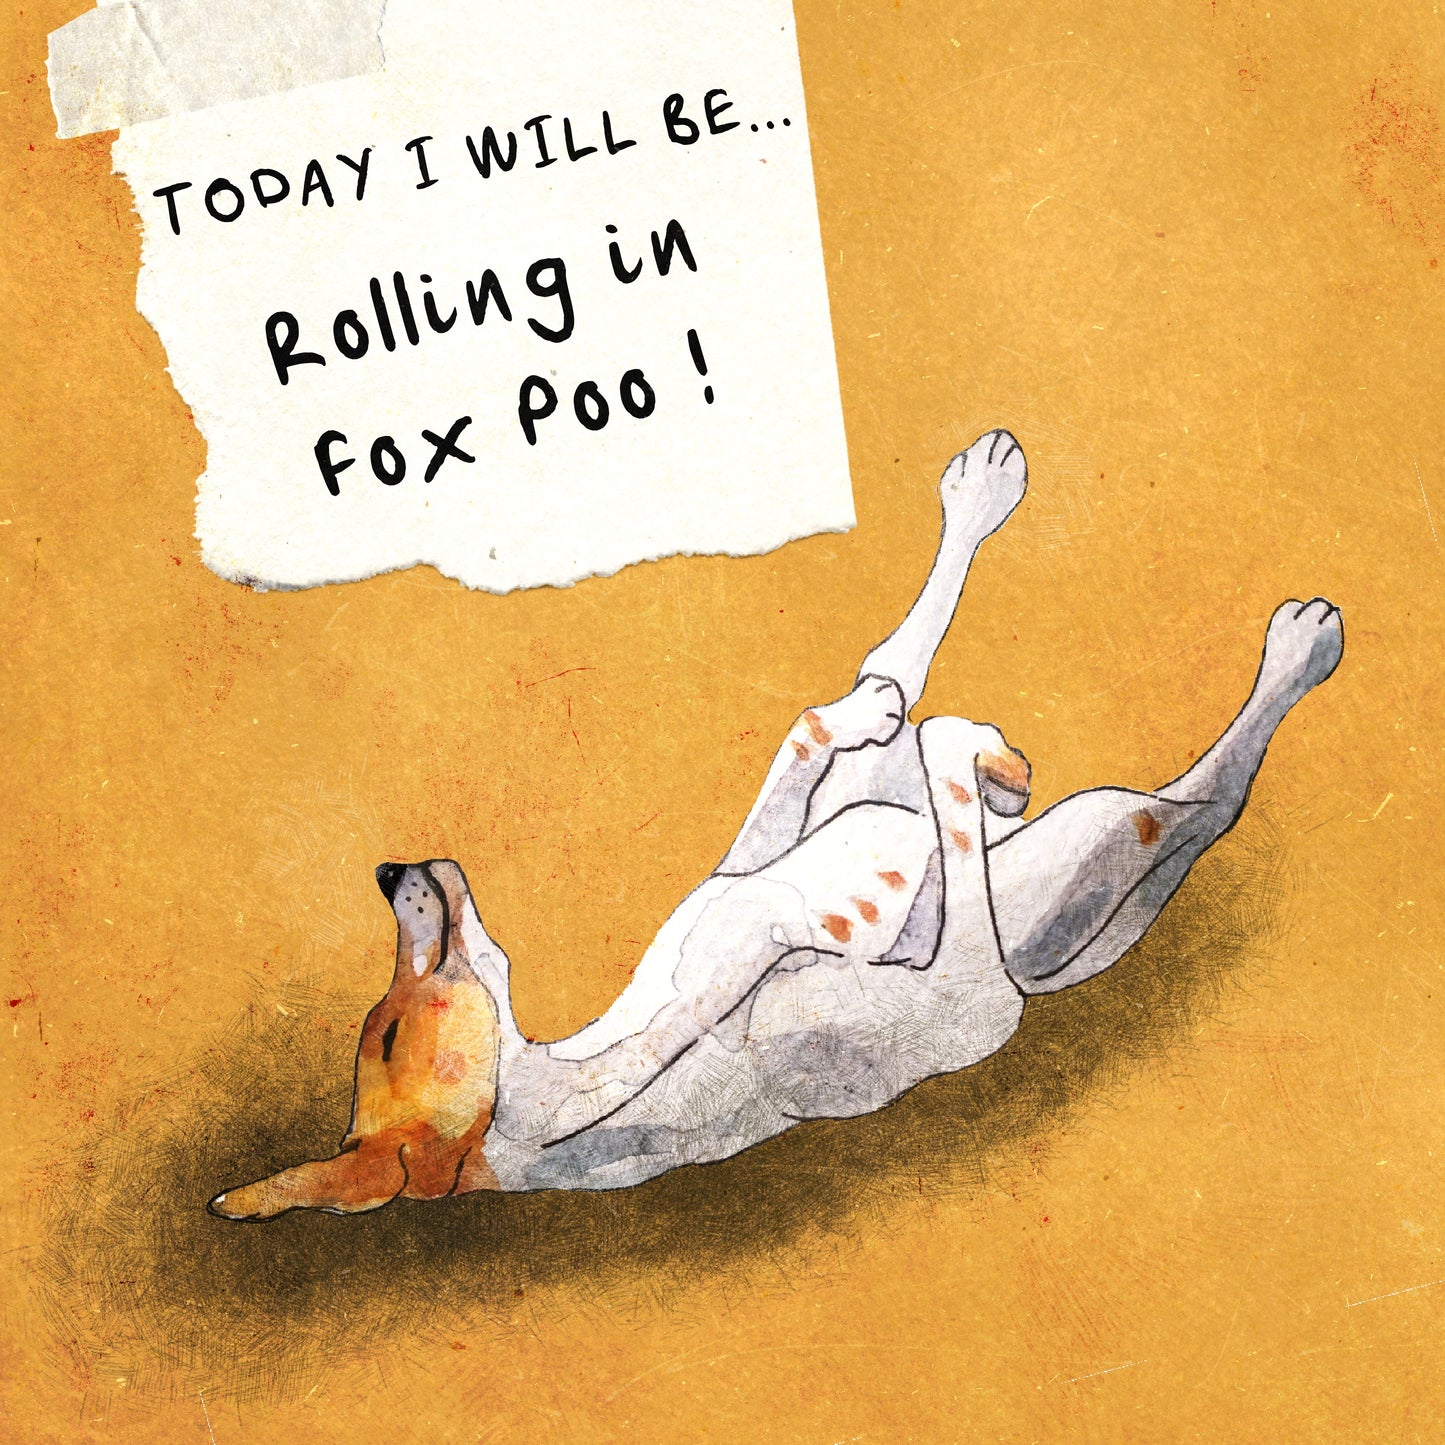 Today I will be...Rolling in fox poo - Greeting Card